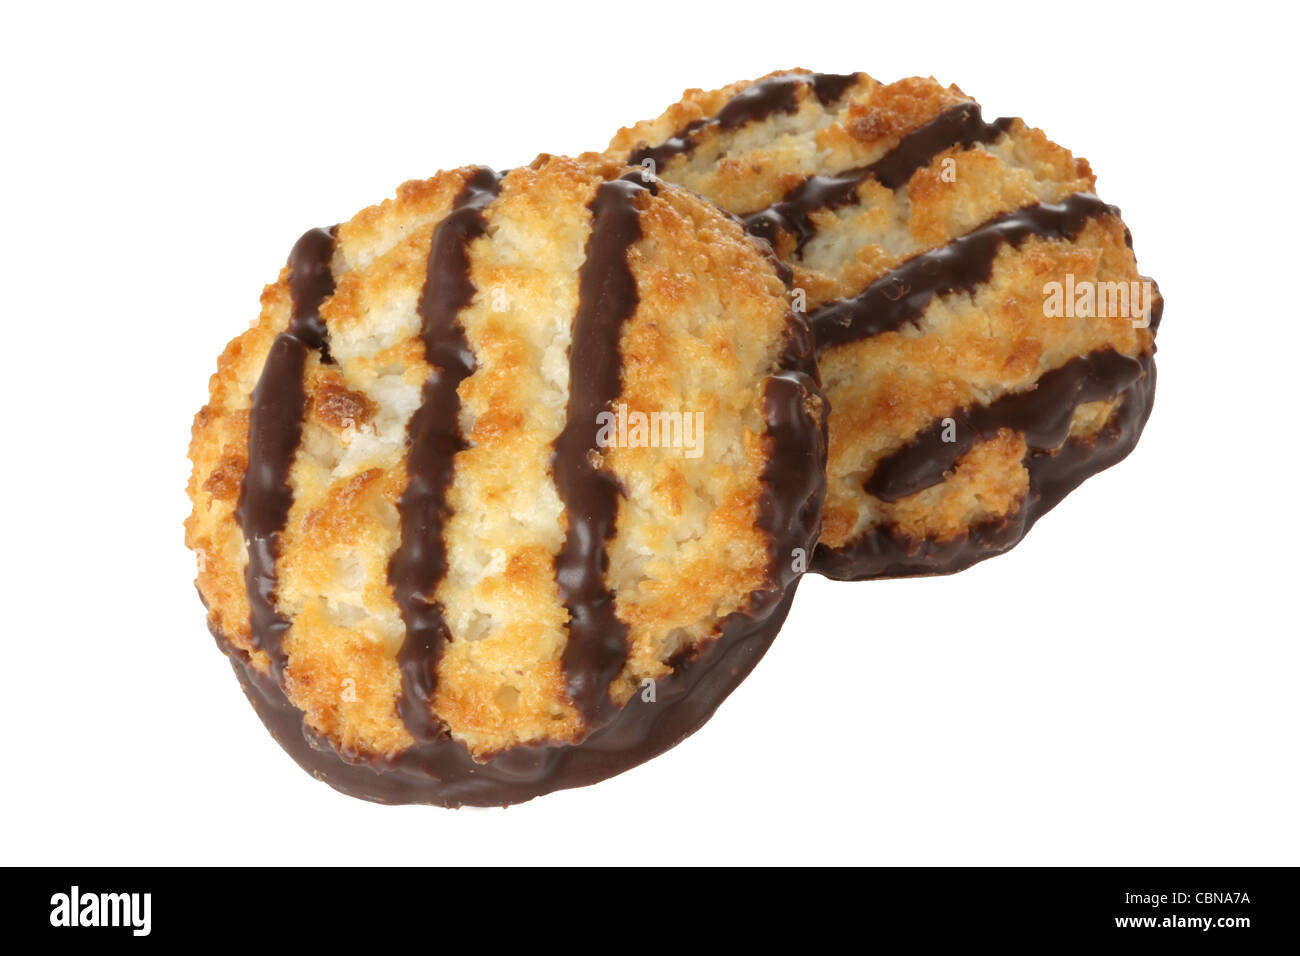 Authentic Baked Chocolate Macaroon Biscuits Against A White Background With A Clipping Path And No People Stock Photo